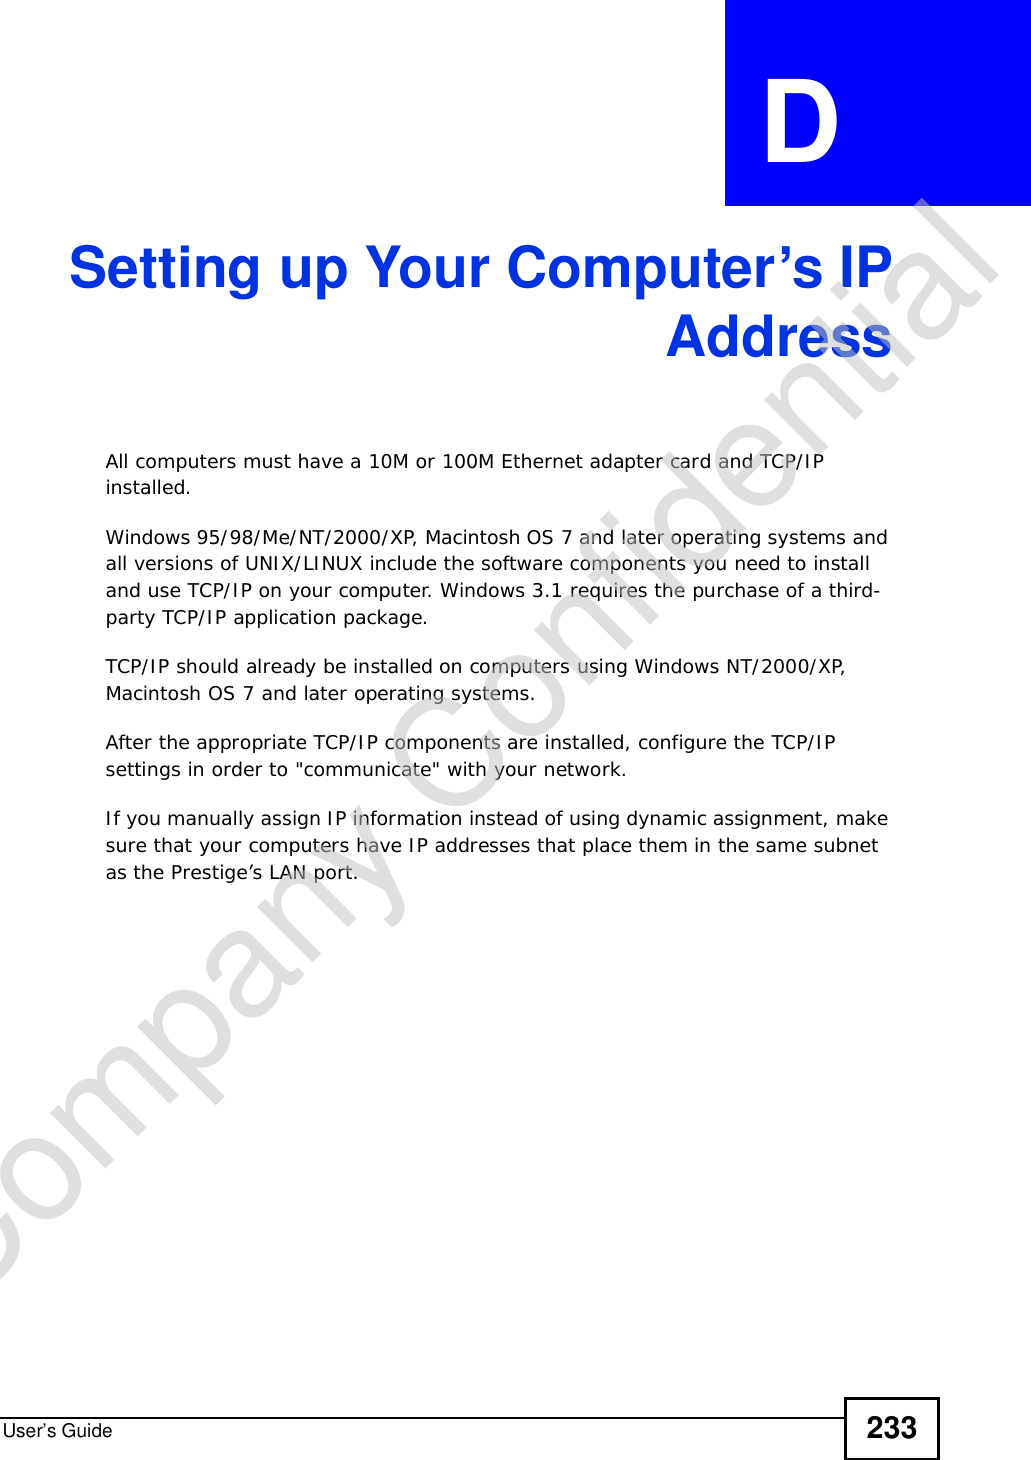 User’s Guide 233APPENDIX  D Setting up Your Computer’s IPAddressAll computers must have a 10M or 100M Ethernet adapter card and TCP/IP installed. Windows 95/98/Me/NT/2000/XP, Macintosh OS 7 and later operating systems and all versions of UNIX/LINUX include the software components you need to install and use TCP/IP on your computer. Windows 3.1 requires the purchase of a third-party TCP/IP application package.TCP/IP should already be installed on computers using Windows NT/2000/XP, Macintosh OS 7 and later operating systems.After the appropriate TCP/IP components are installed, configure the TCP/IP settings in order to &quot;communicate&quot; with your network. If you manually assign IP information instead of using dynamic assignment, make sure that your computers have IP addresses that place them in the same subnet as the Prestige’s LAN port.Company Confidential